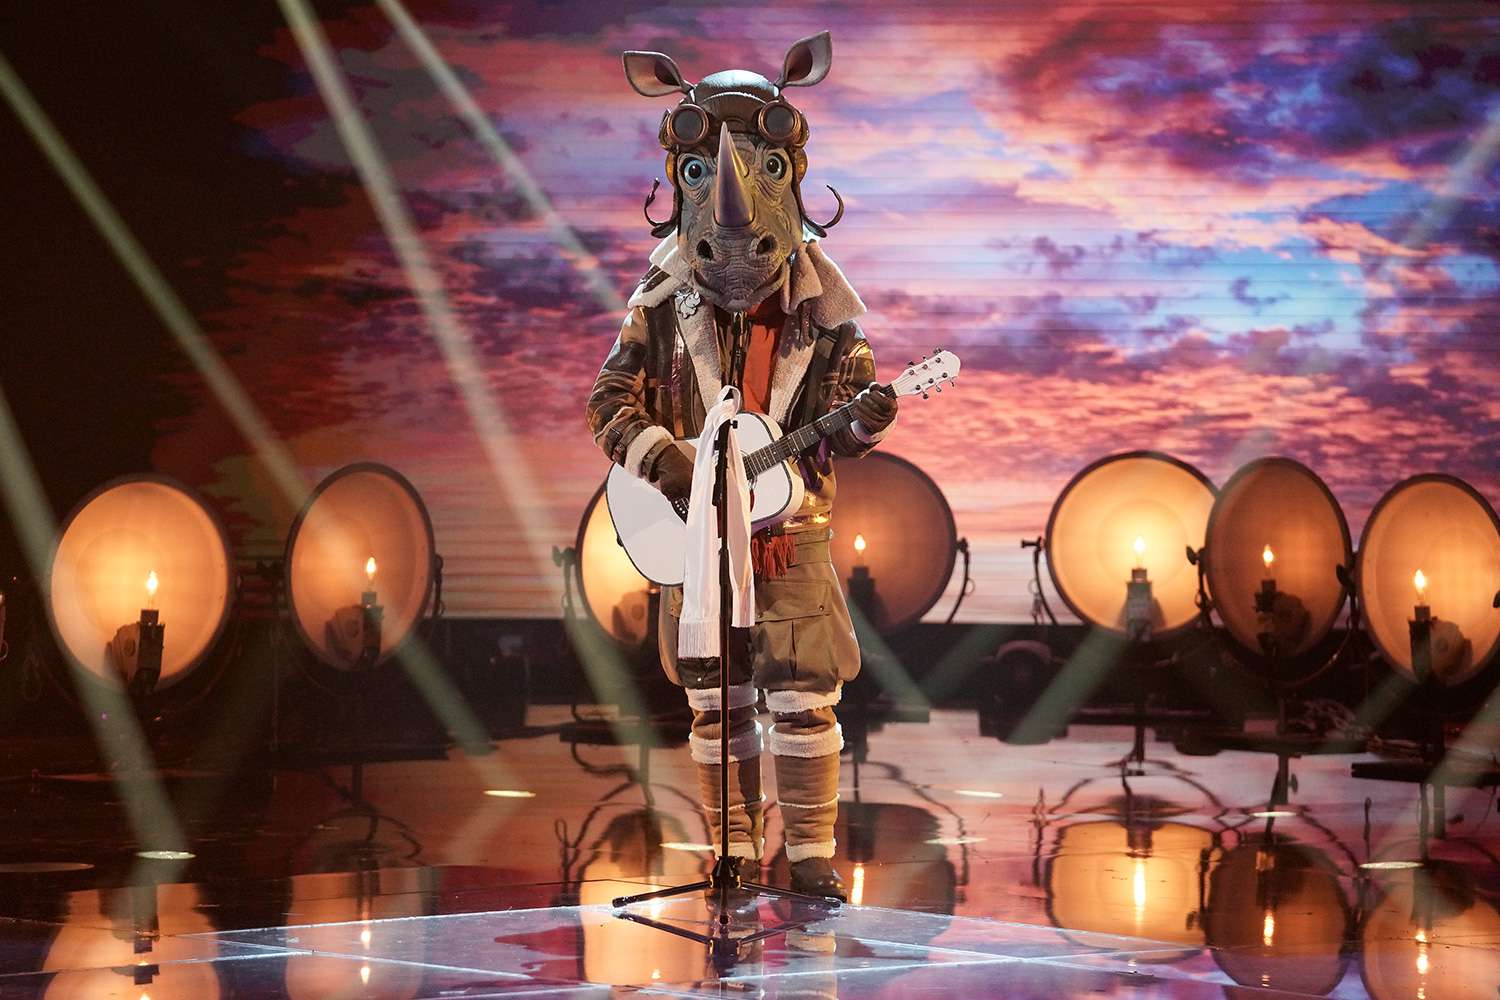 THE MASKED SINGER: The Rhino in the &ldquo;A Day In the Mask: The Semi Finals / After the Mask: A Day In the Mask: The Semi Finals&rdquo;